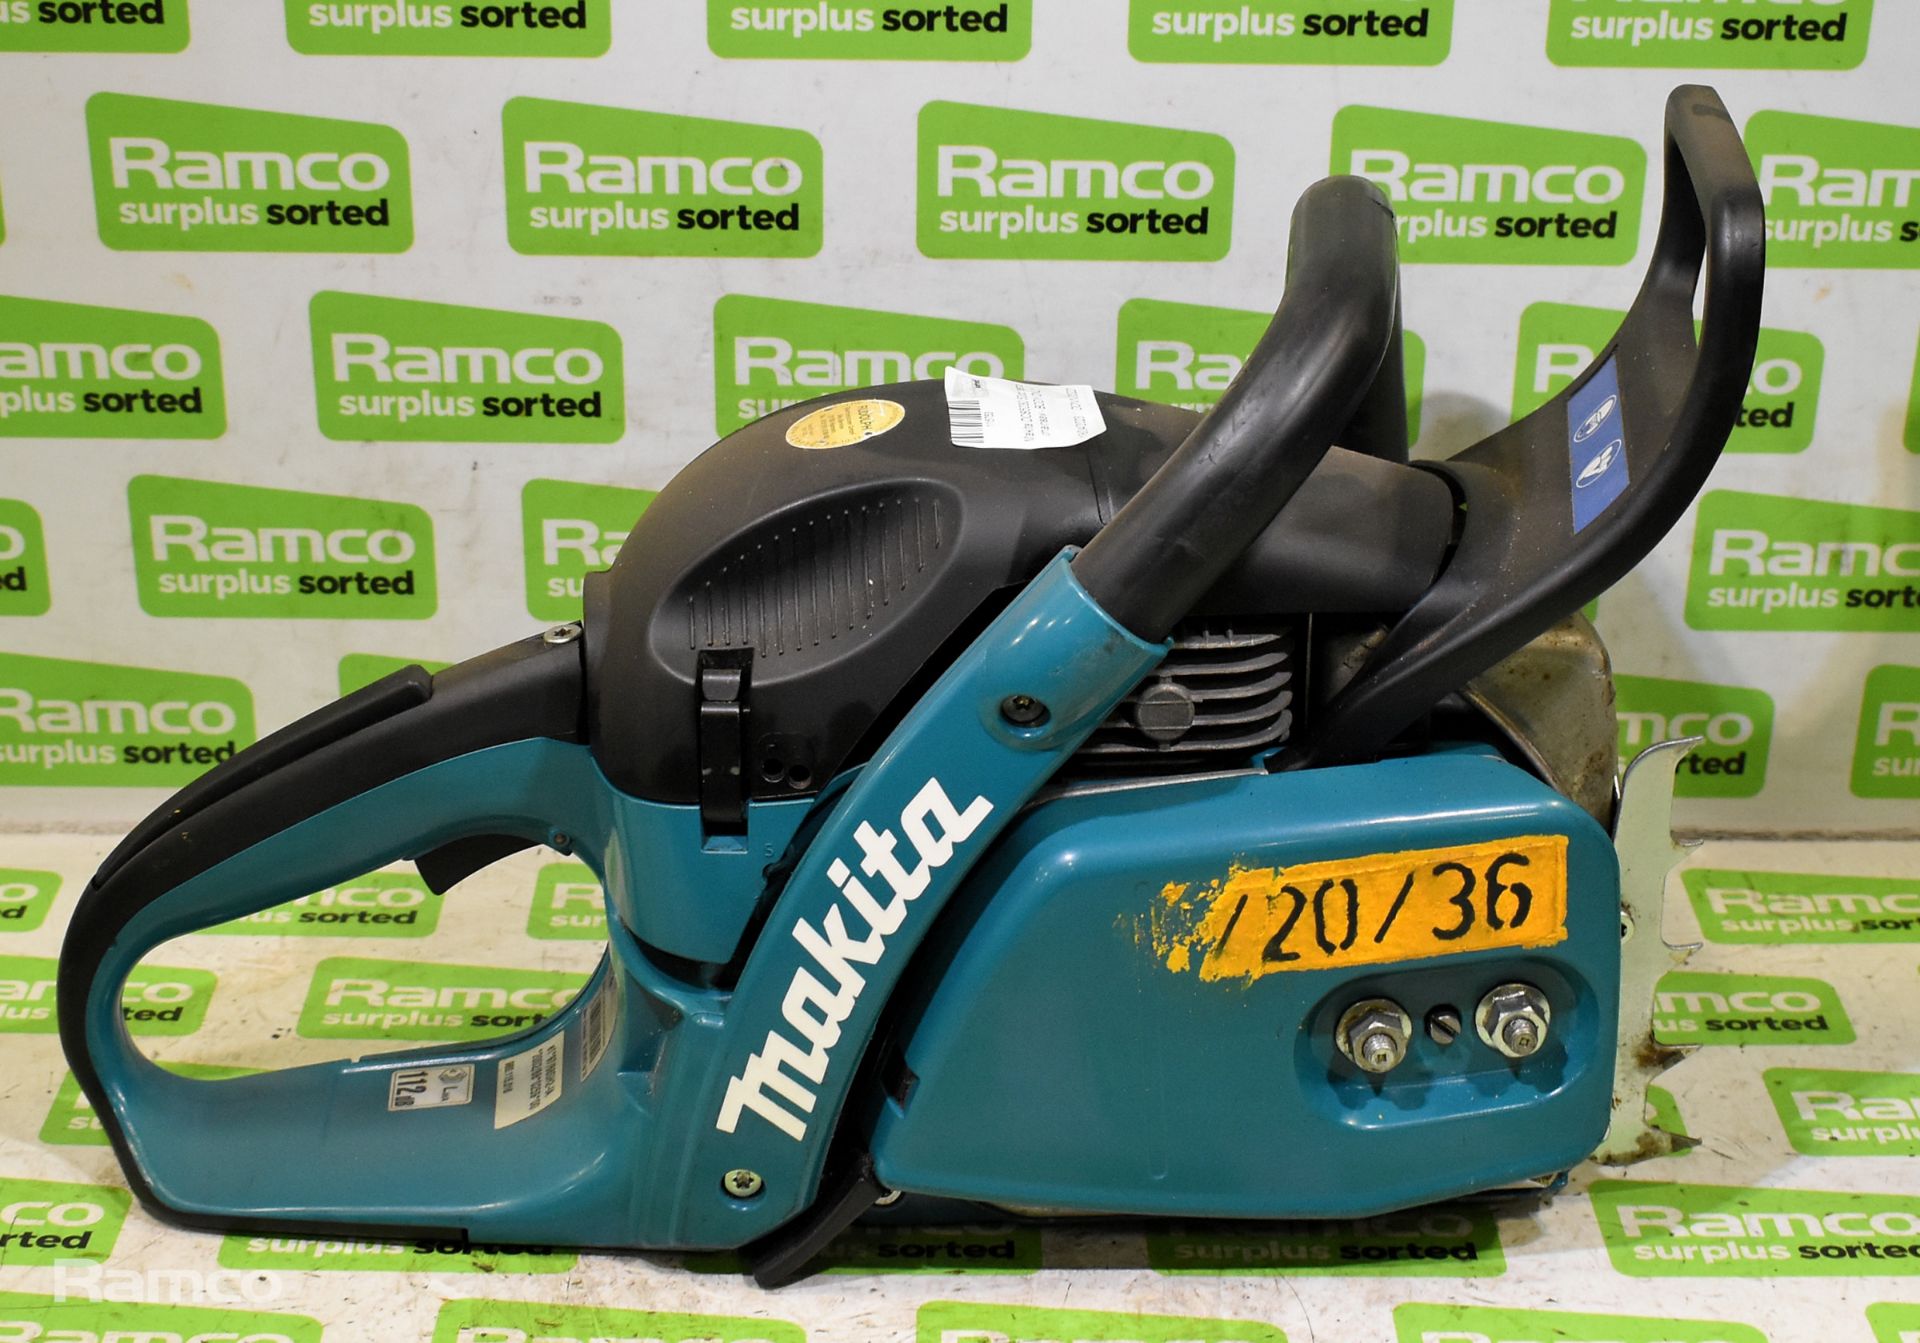 6x Makita DCS5030 50cc petrol chainsaw - BODIES ONLY - AS SPARES & REPAIRS - Image 29 of 33